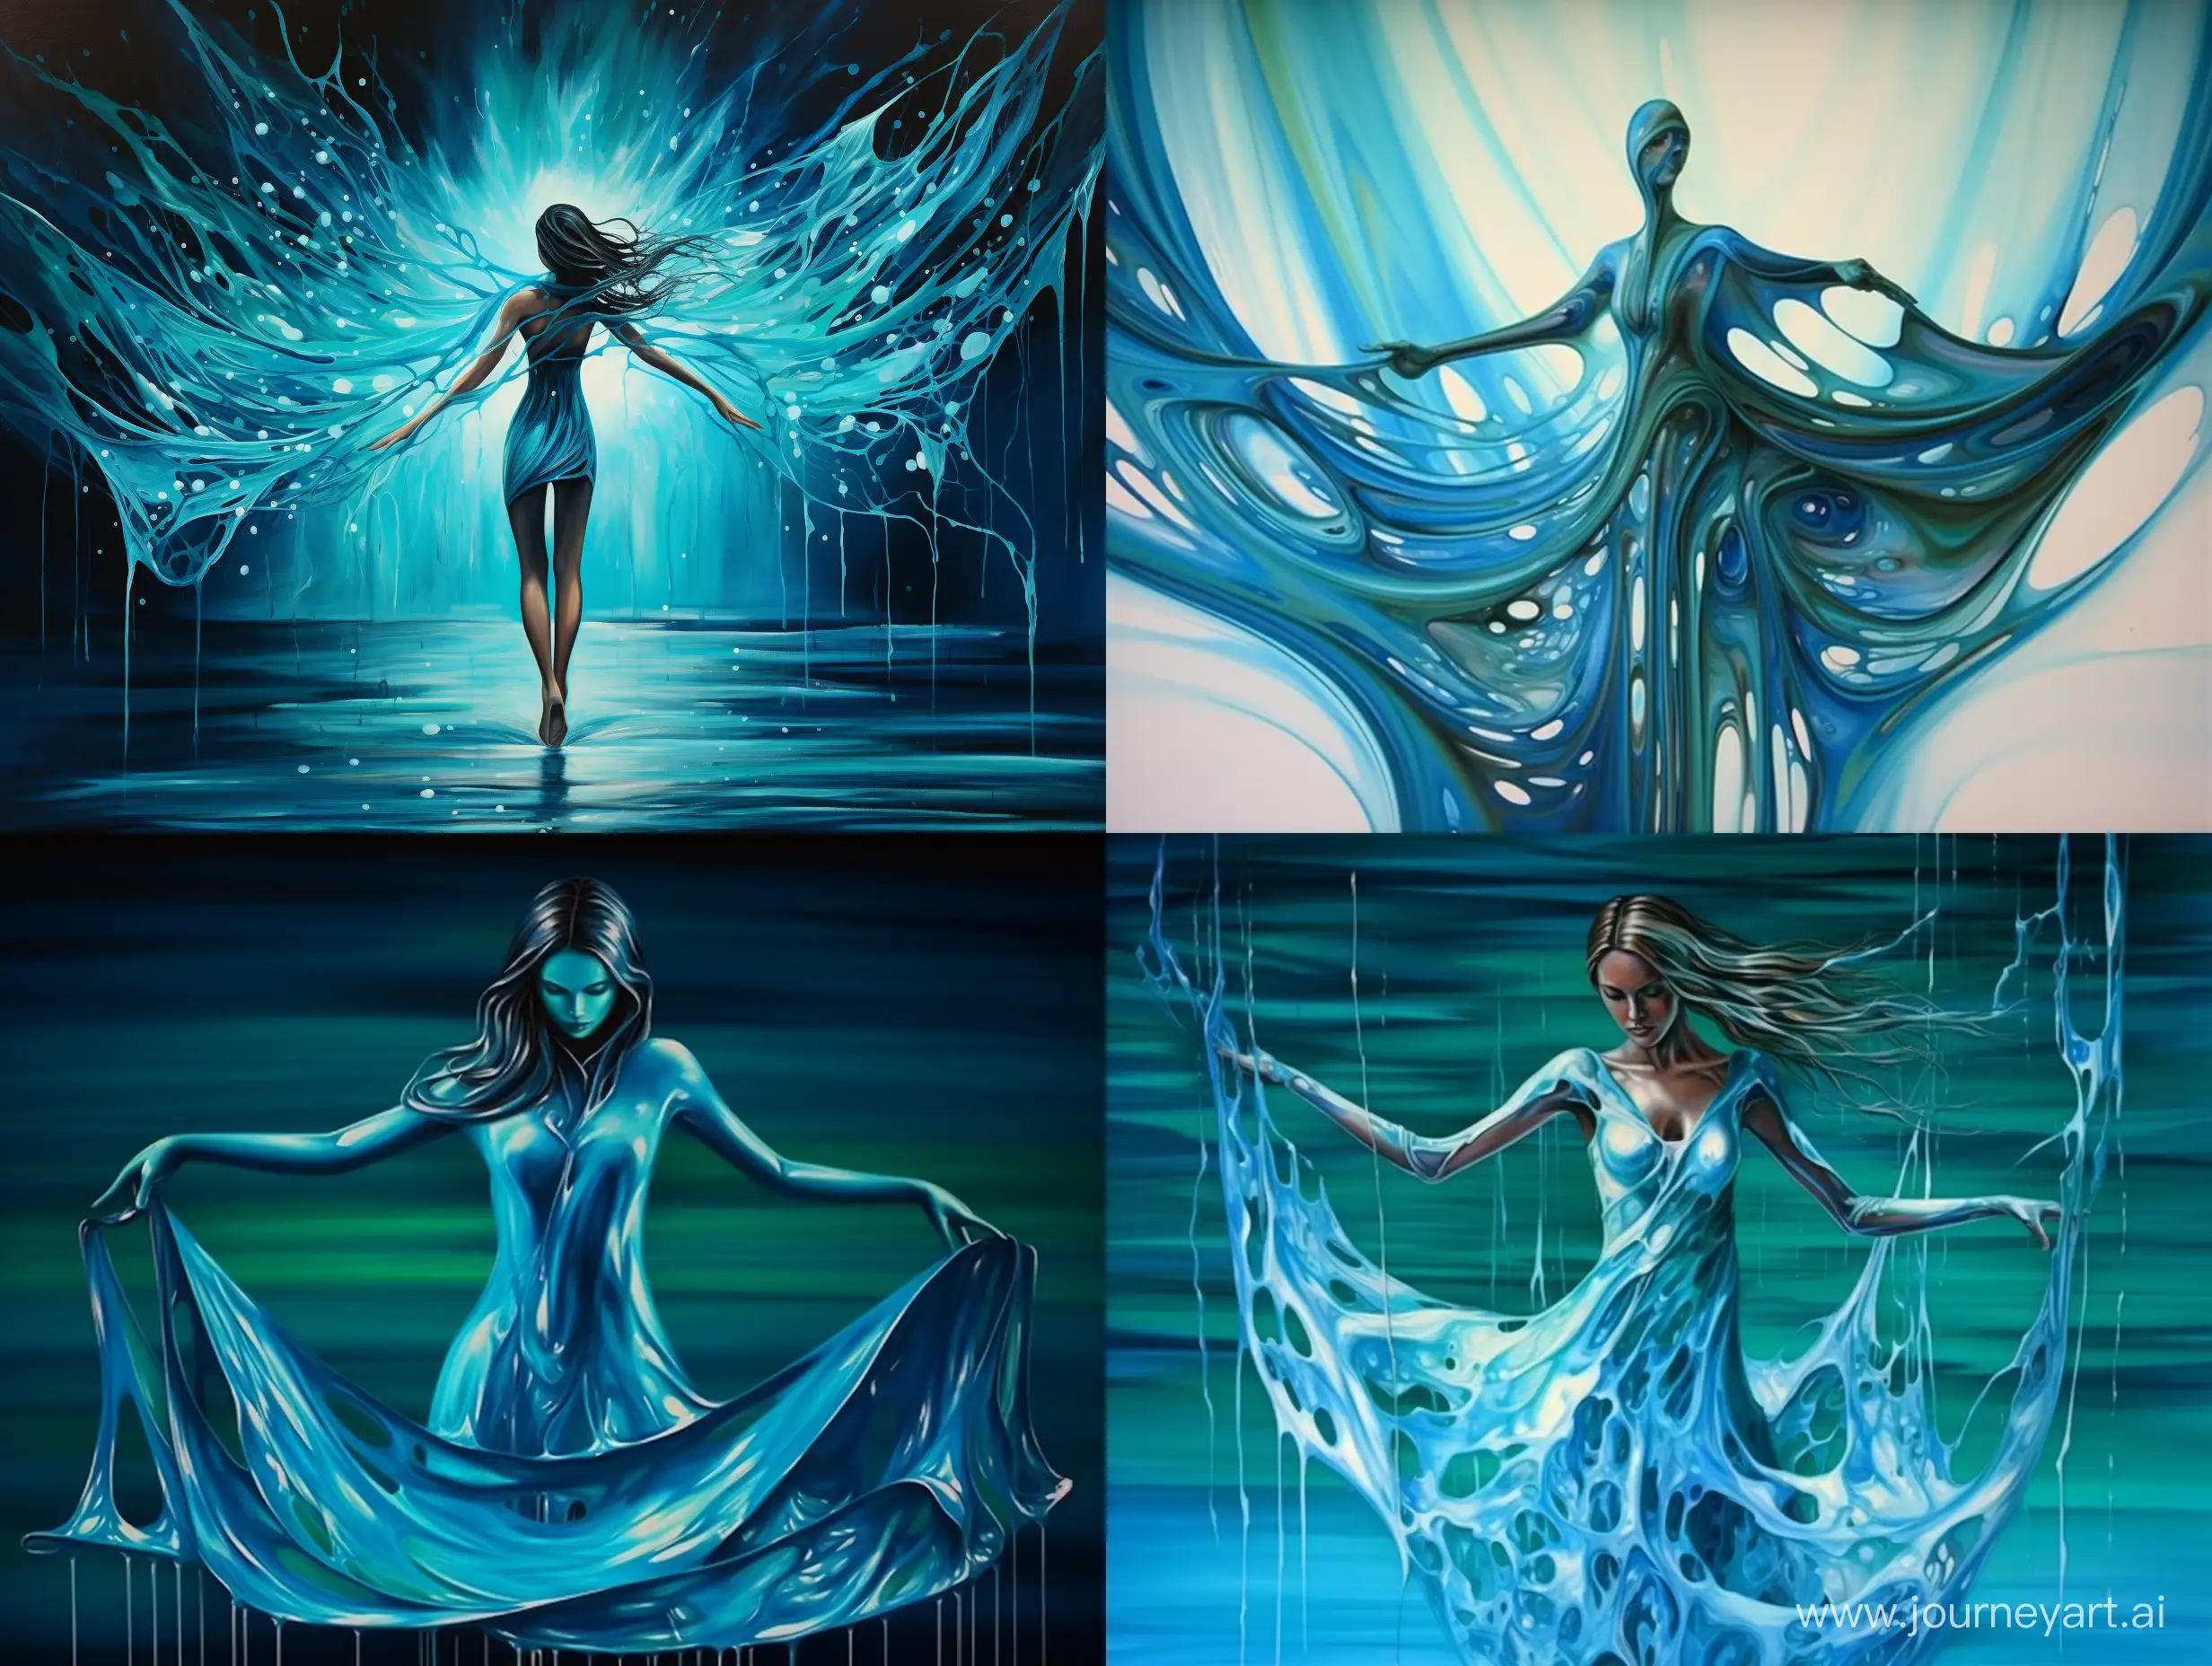 A dancer girl made of a splash of blue liquid and green liquid inside. The suspended droplets and the smooth interplay of light and dark hues create a visually striking scene that portrays the elegant flow and contrast between the two liquids, high details, best of quality.